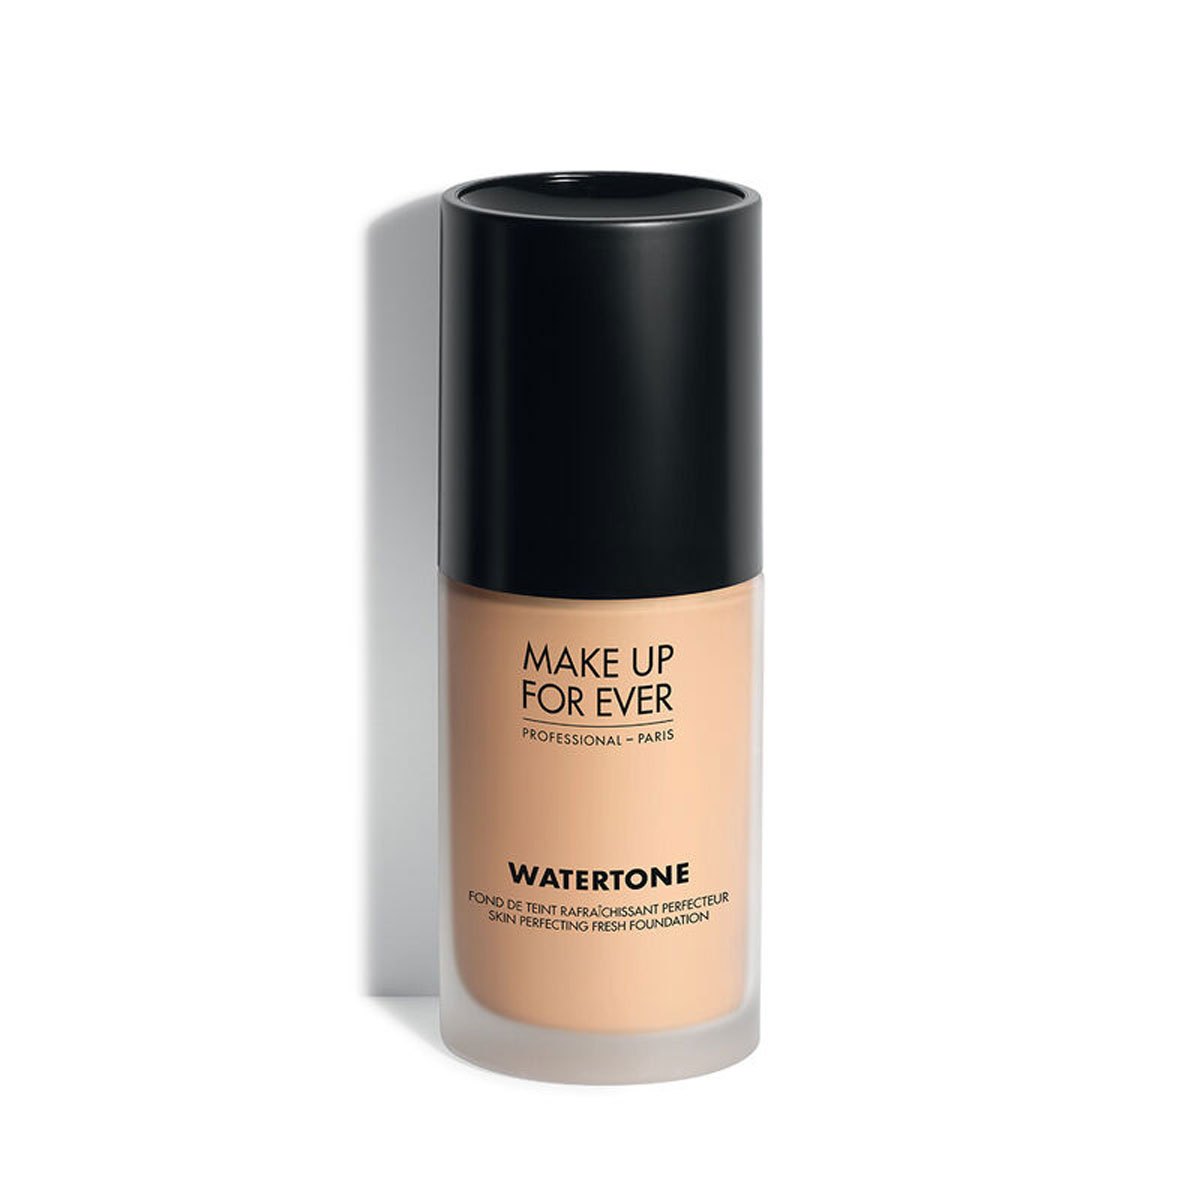 Make Up For Ever Watertone - Transfert-Proof Foundation, Natural Radiant Finish Y325 Flesh